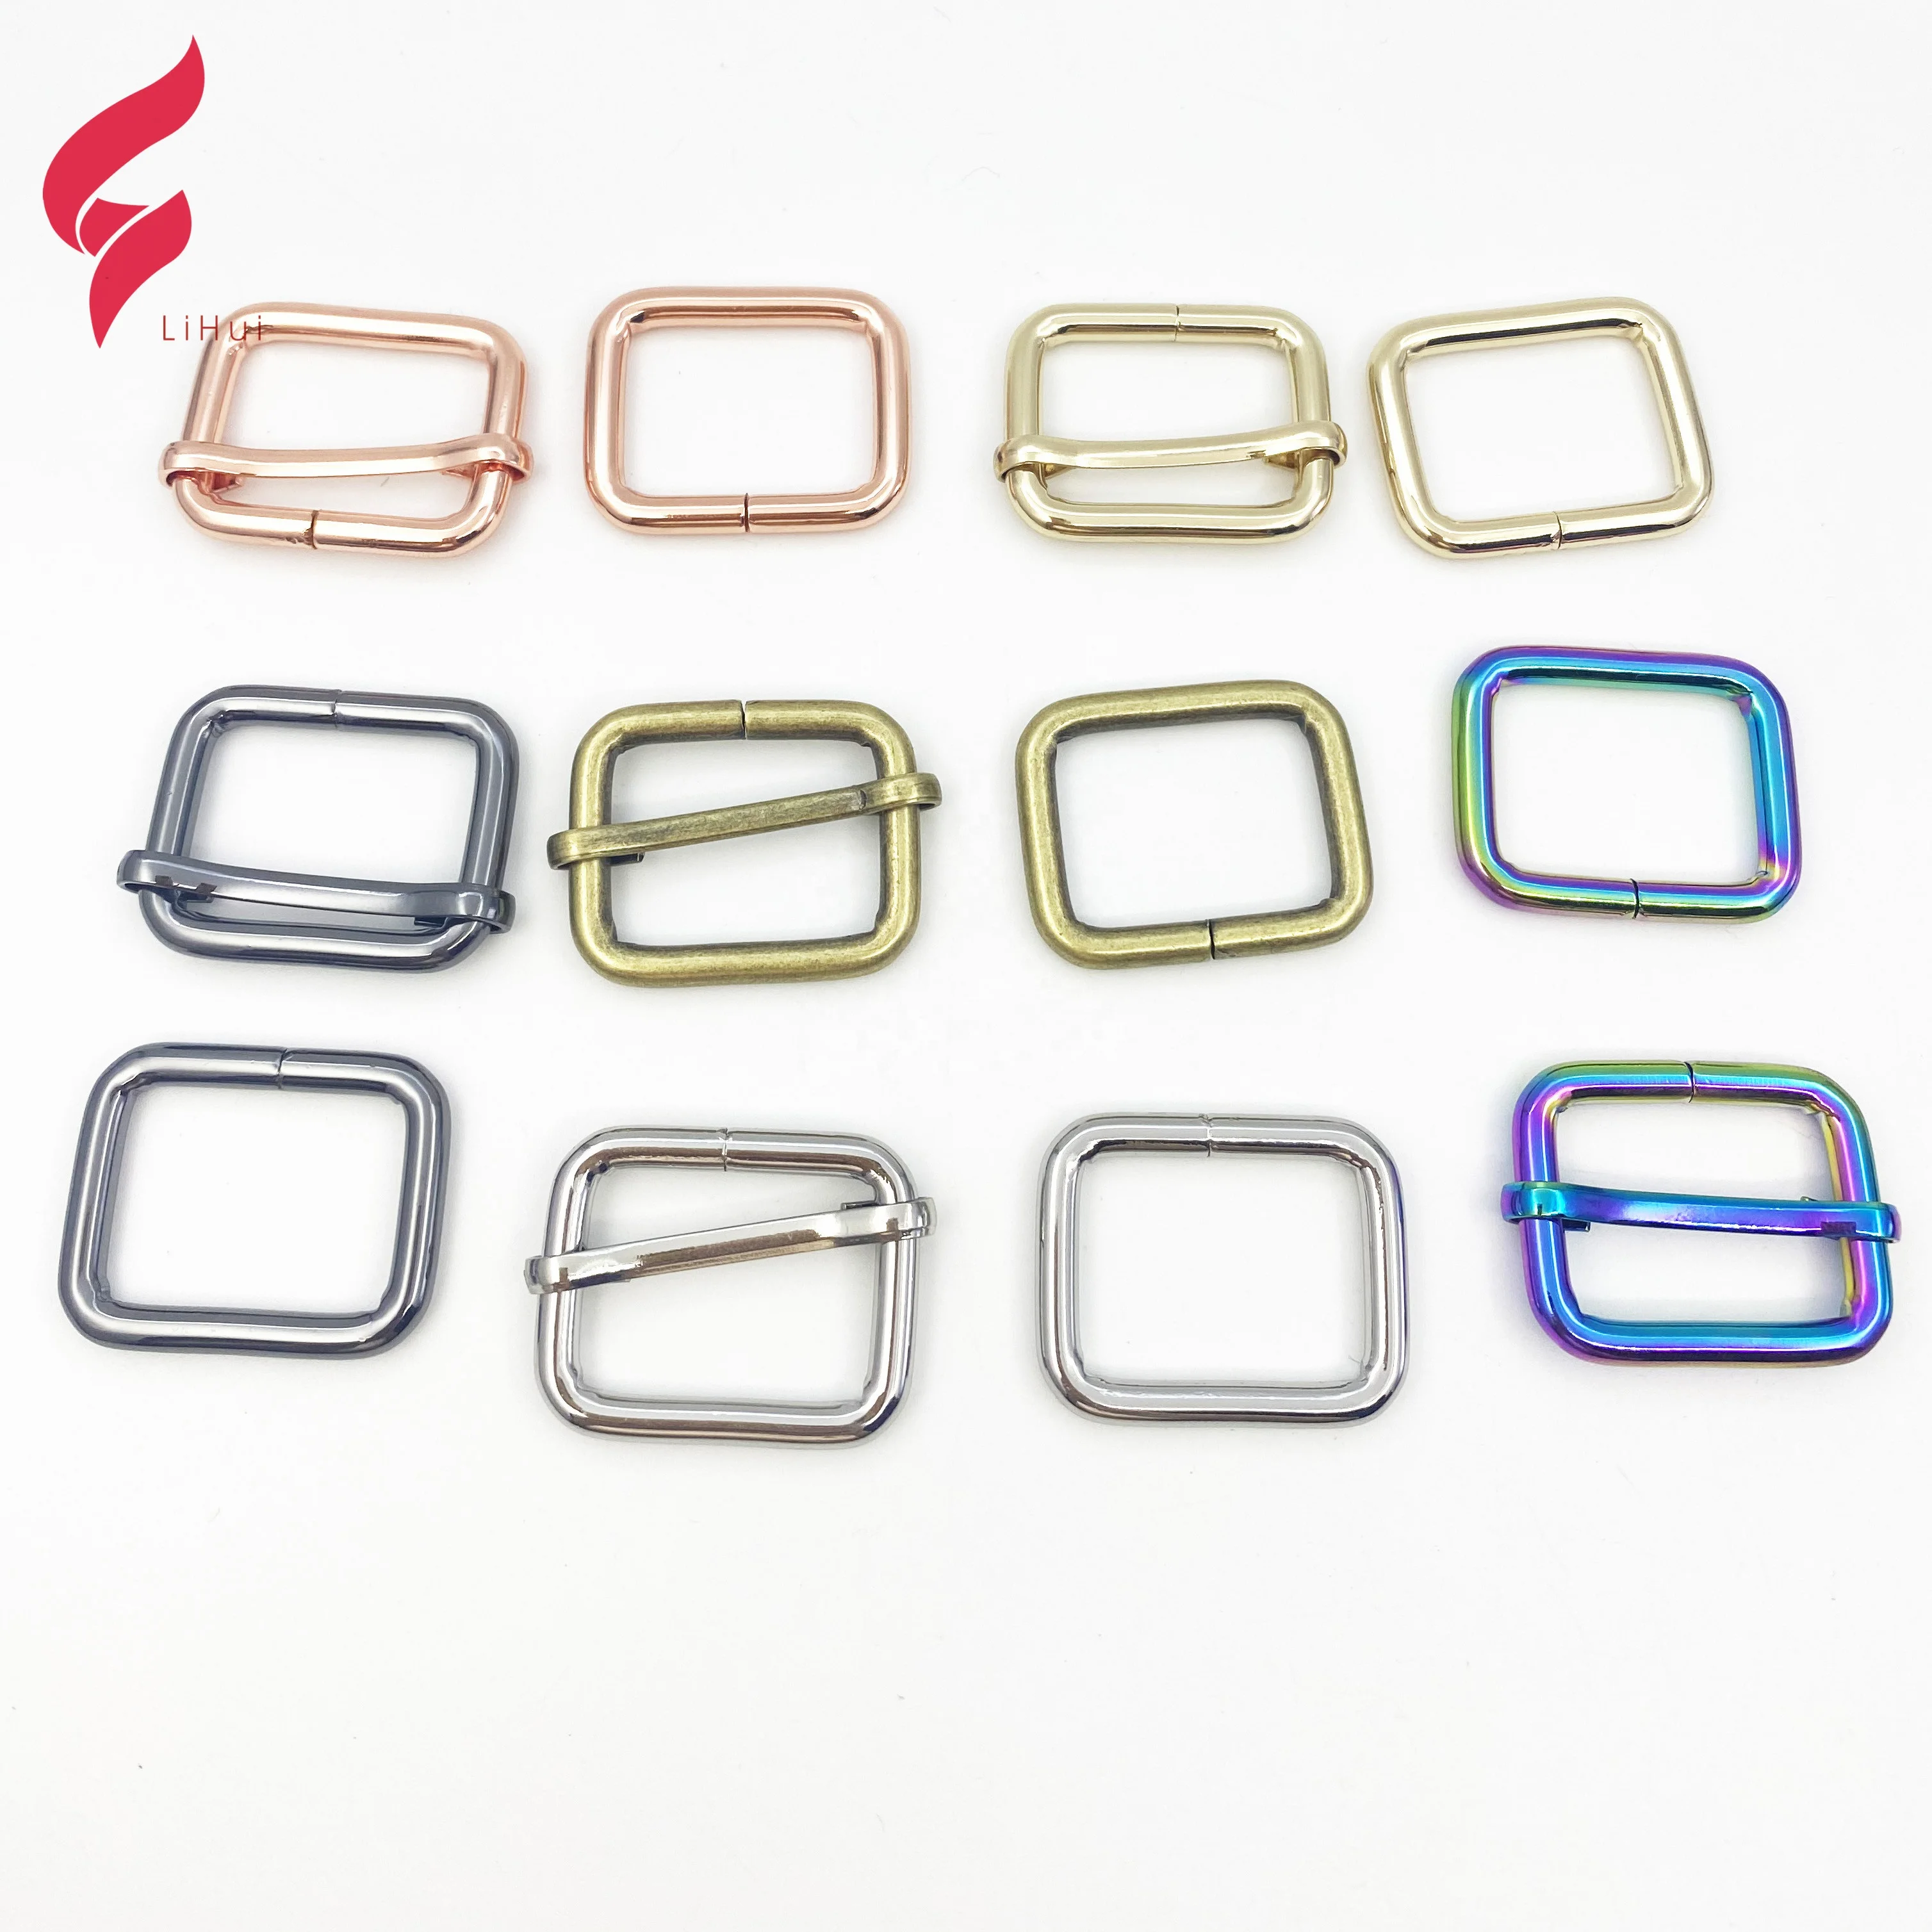 

Pass SGS test bag making accessories 1 inch rectangular slide buckle 25mm metal adjuster buckle side release buckle for handbag, Nickle ,gold ,gunmetal or as your request